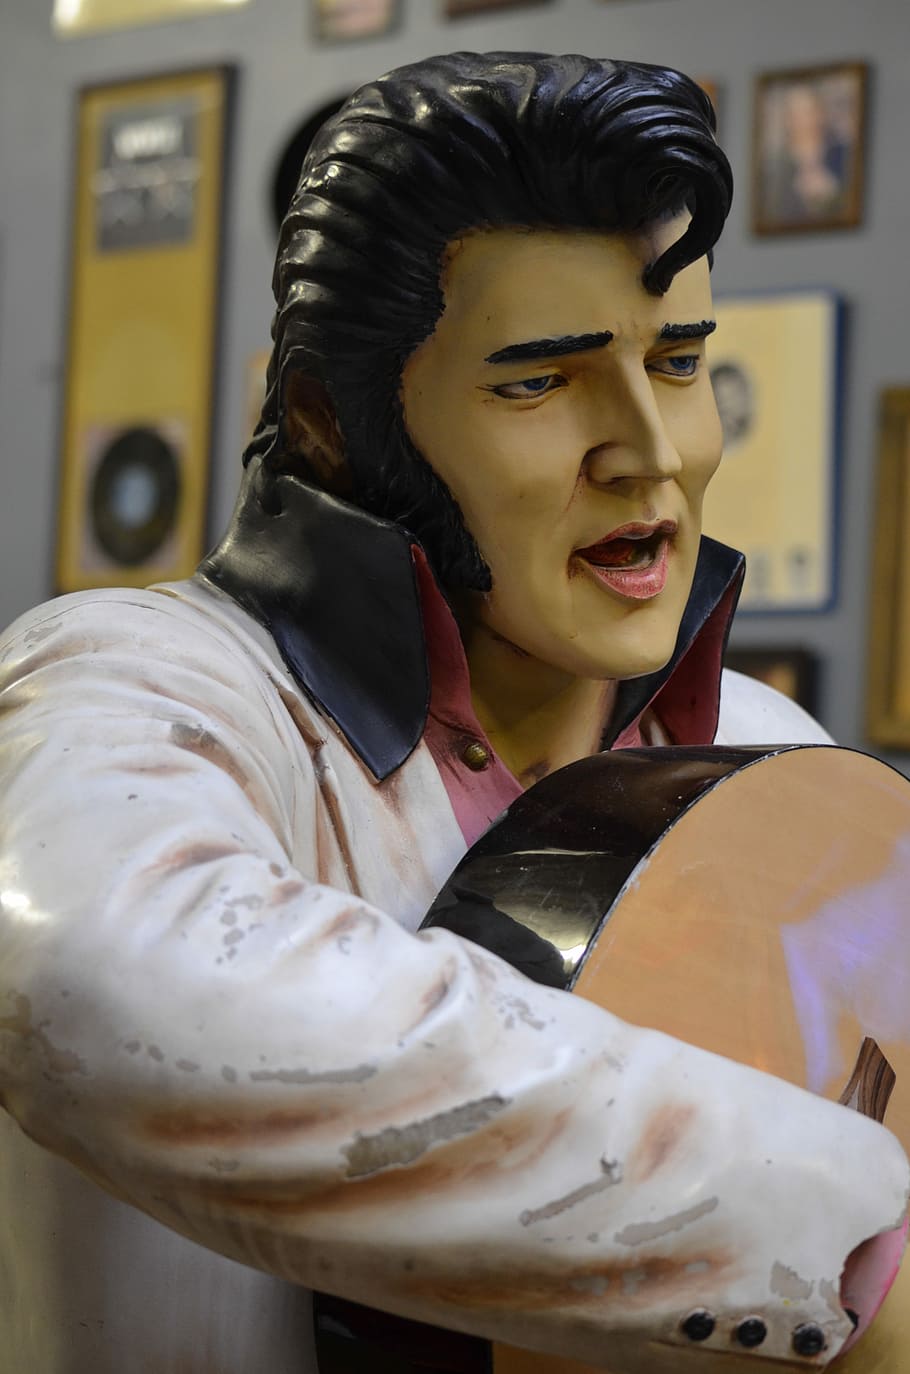 Elvis, Wooden, Carving, Music, art, king, rock and roll, craftsman, wood, sculpture